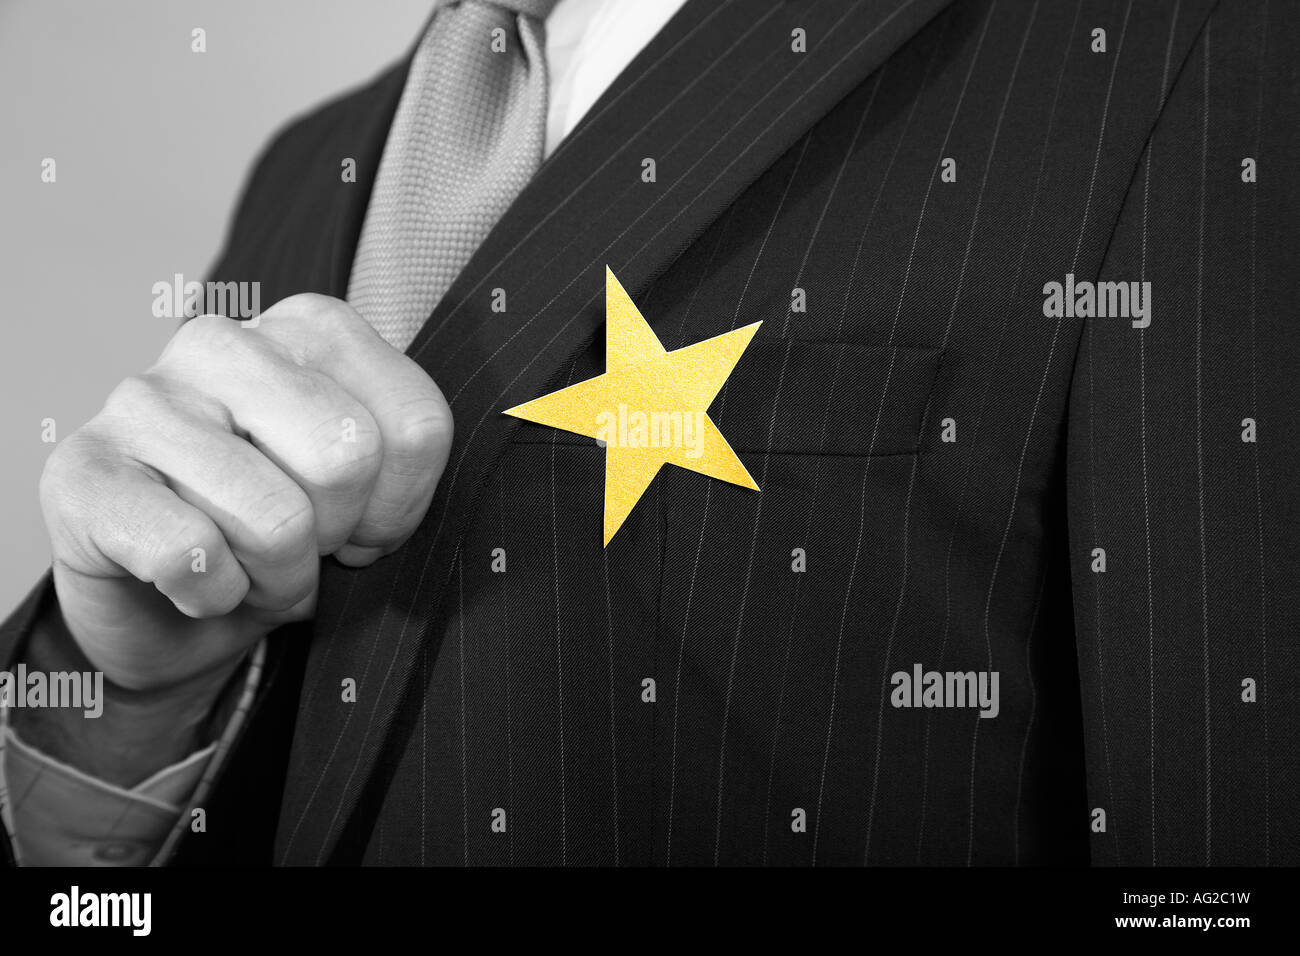 Businessmen with Golden Star on Suit Stock Photo